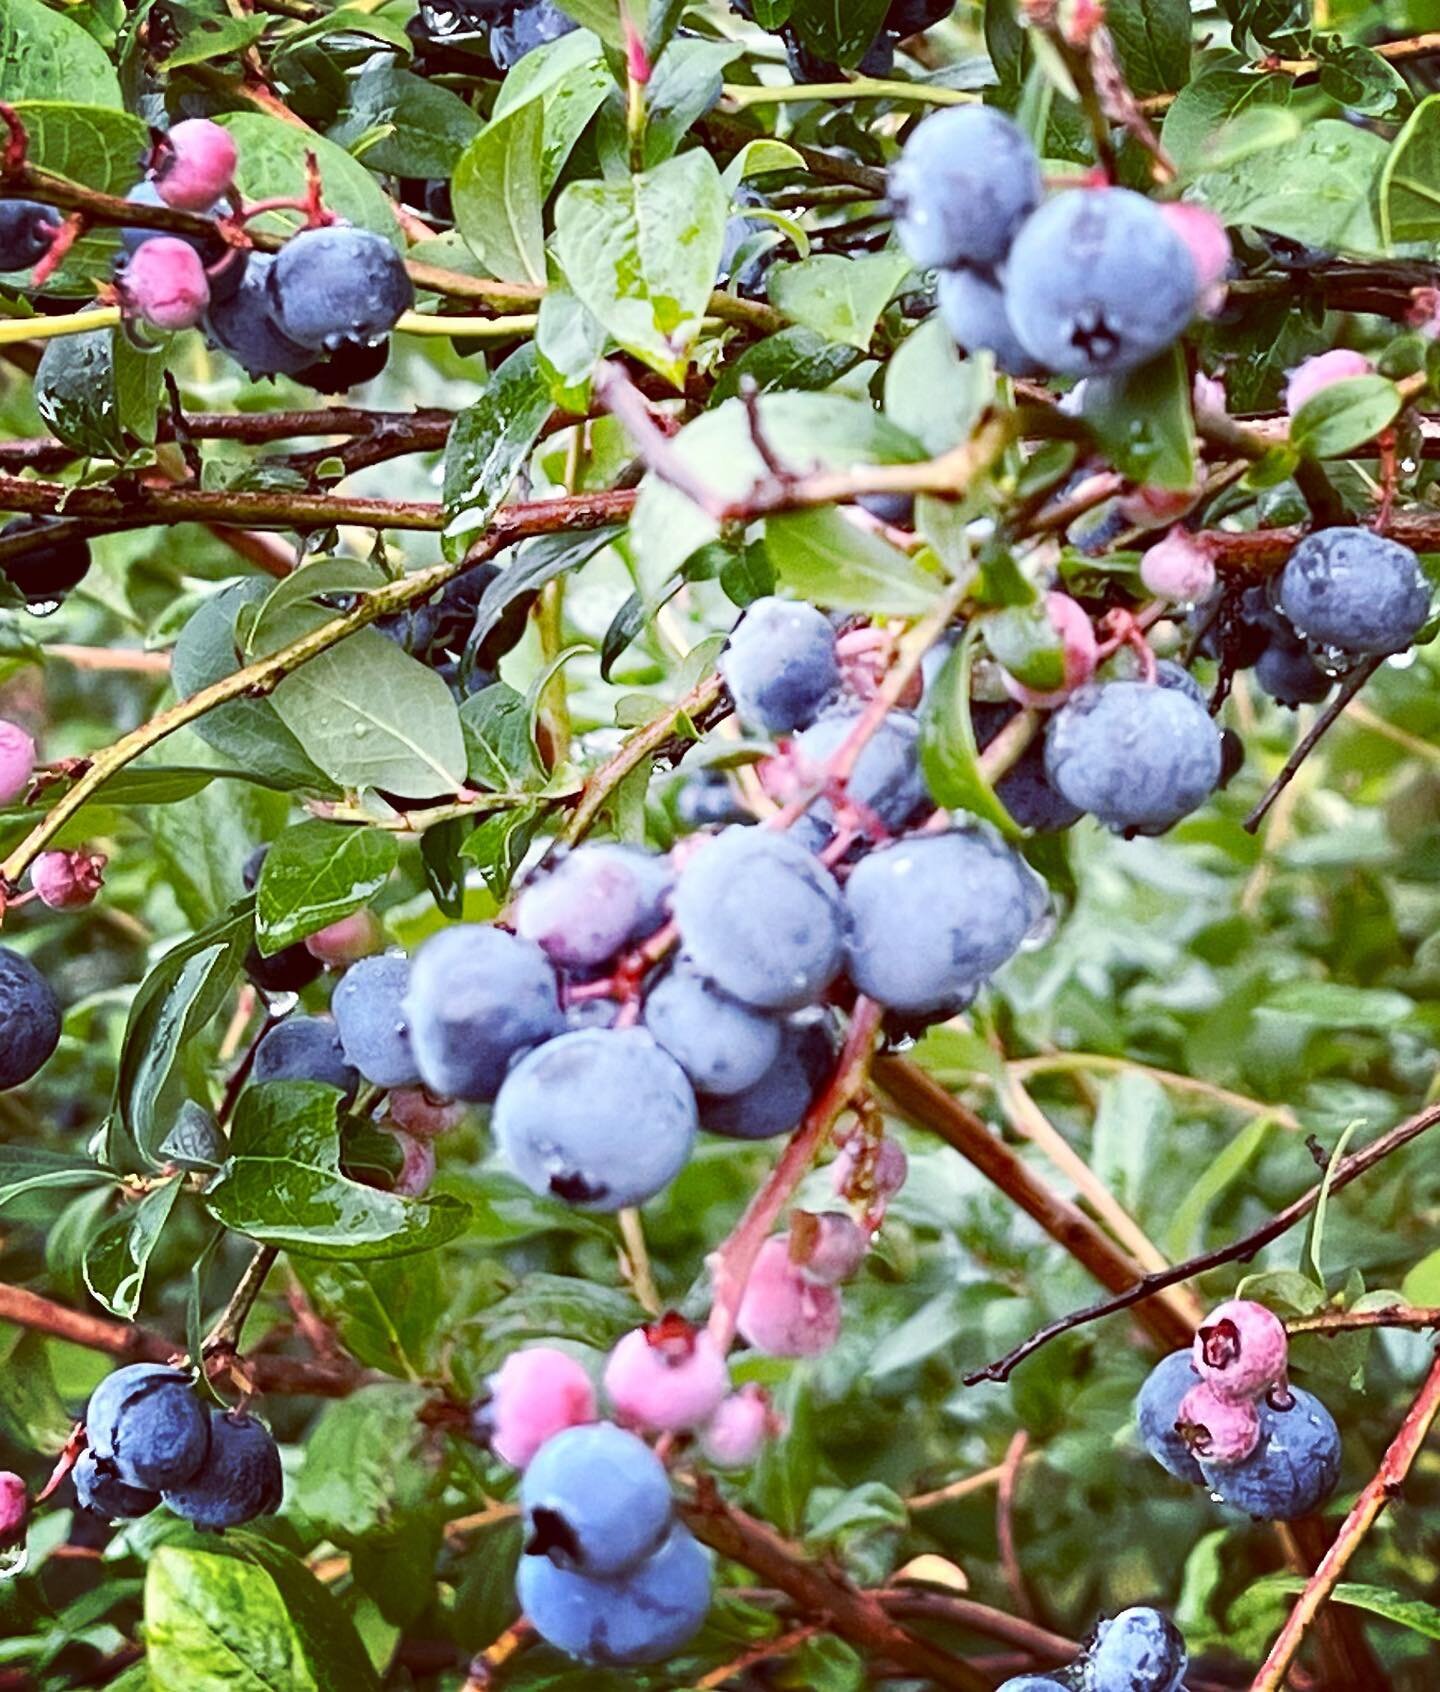 The Patch will re-open for  blueberry picking tomorrow, Wednesday, August 23 and Thursday, August 24.  8 am-8pm. Friday is a maybe depending on berry supply and the forecasted thunderstorms. We have a limited number of rows of beautiful late season p